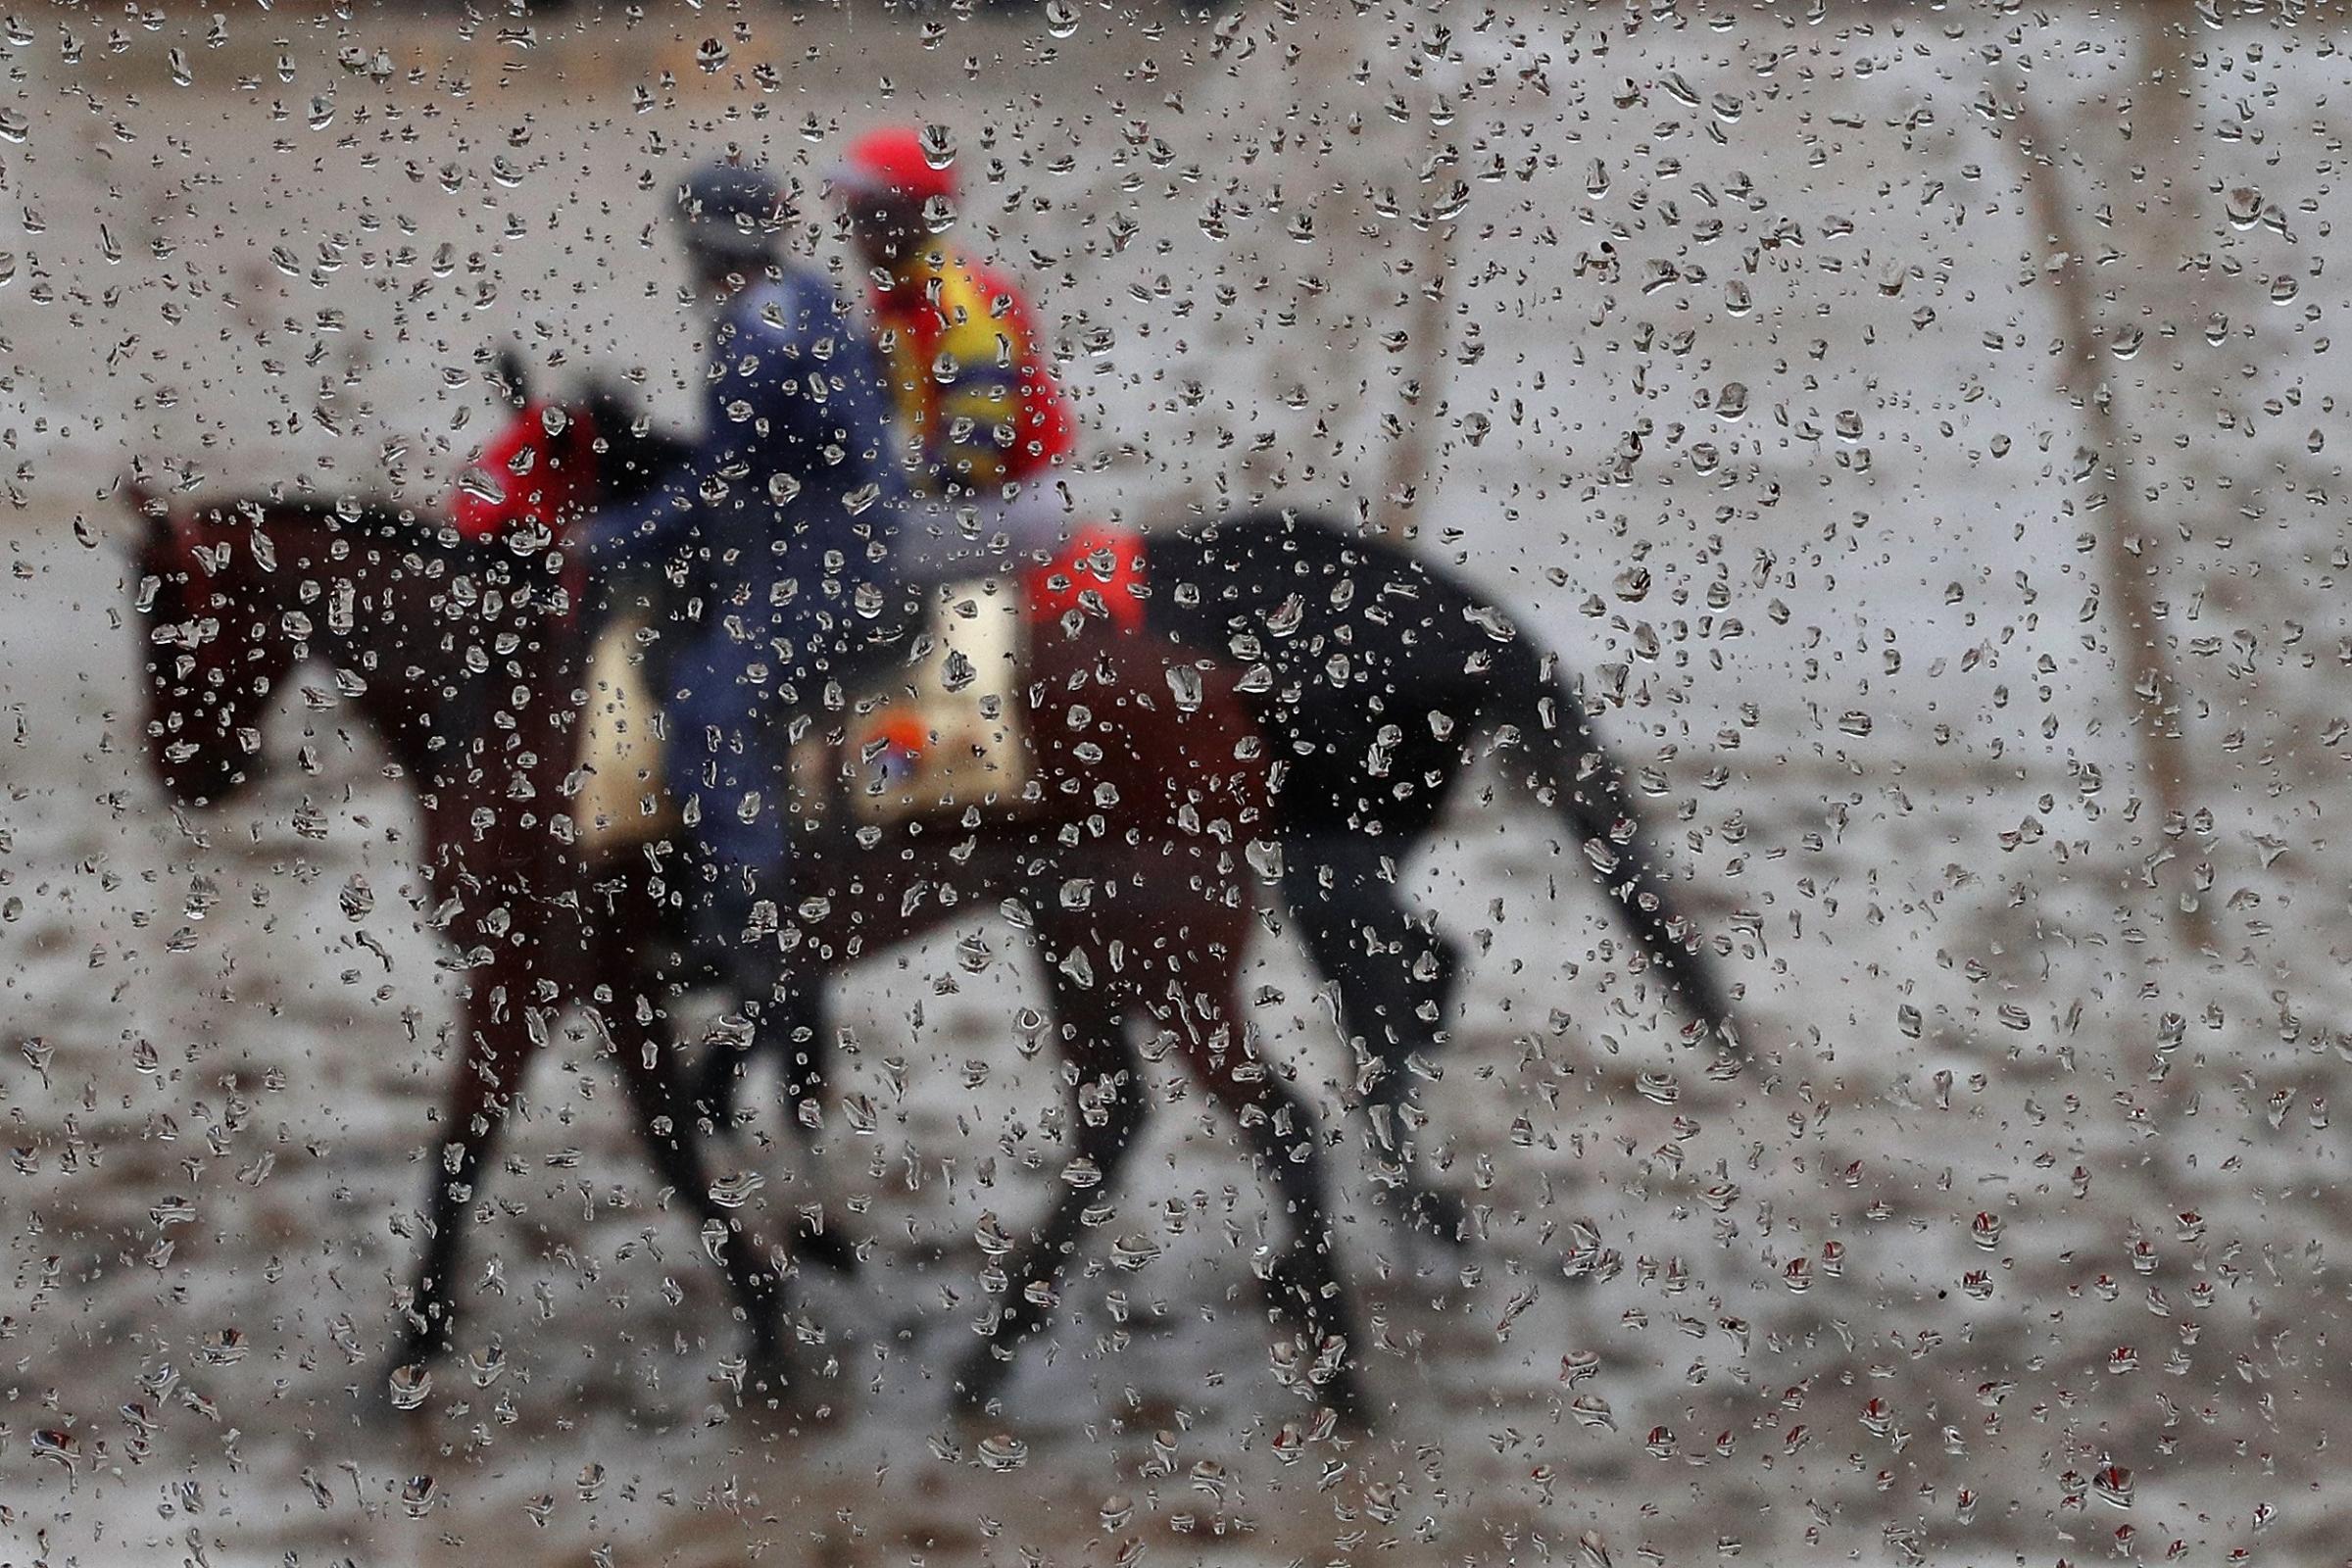 BALTIMORE, MD - MAY 21: Horses are paraded before a race prior to the 141st running of the Preakness Stakes at Pimlico Race Course on May 21, 2016 in Baltimore, Maryland. (Photo by Patrick Smith/Getty Images)